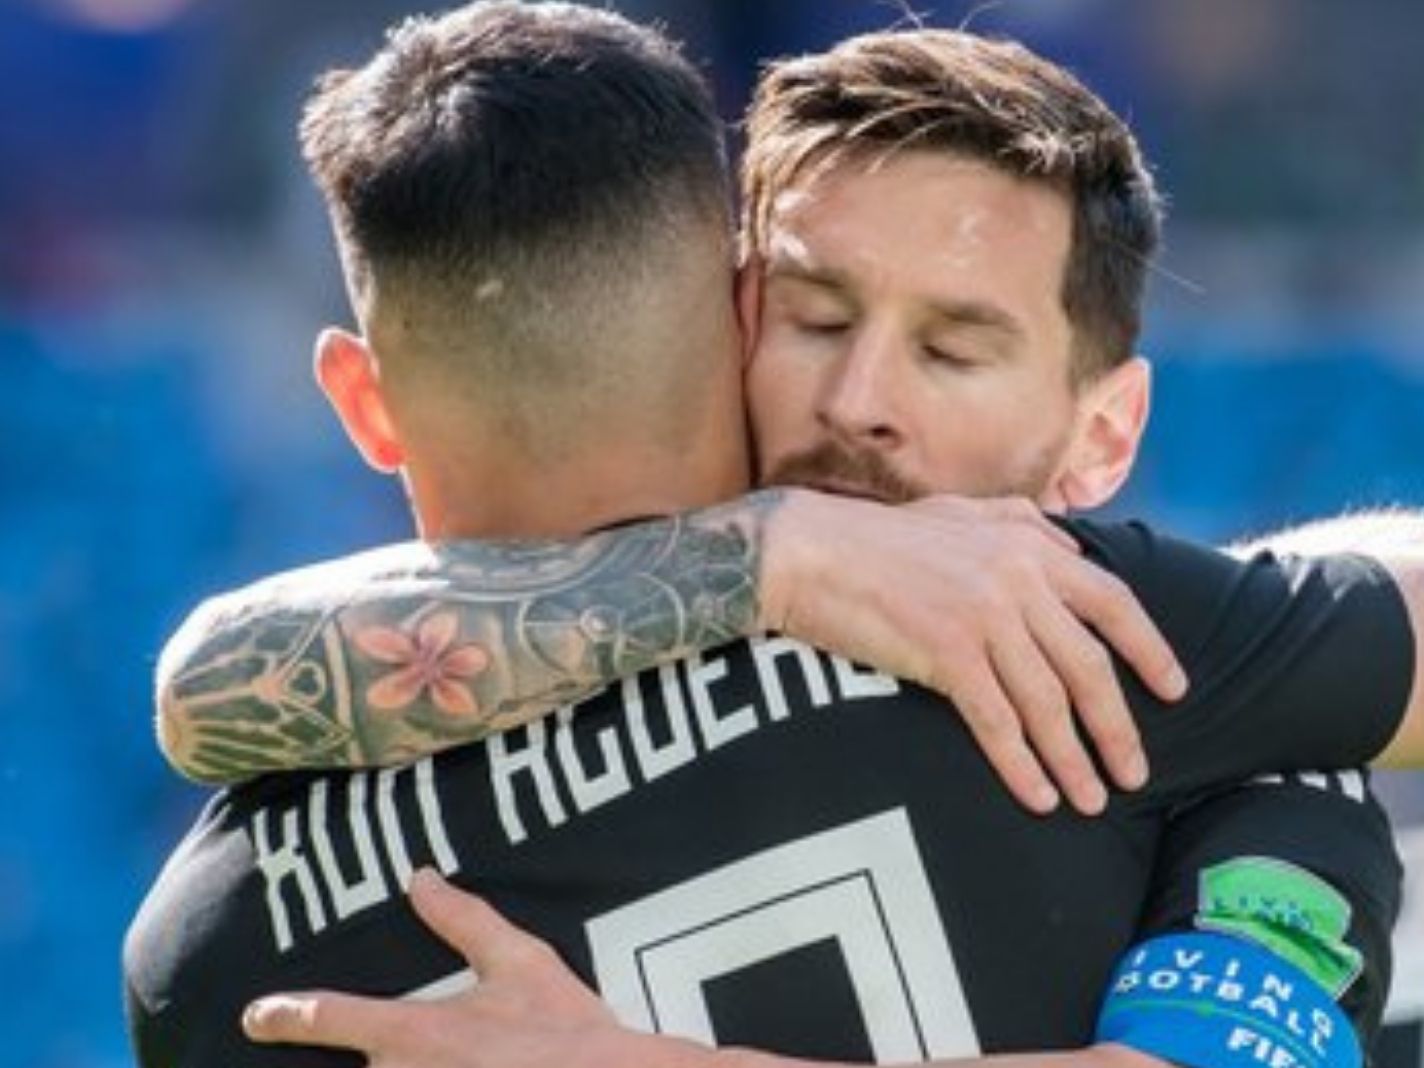 Lionel Messi sparks hilarious comparison with Insta post for Aguero: ‘Bros before hoes’